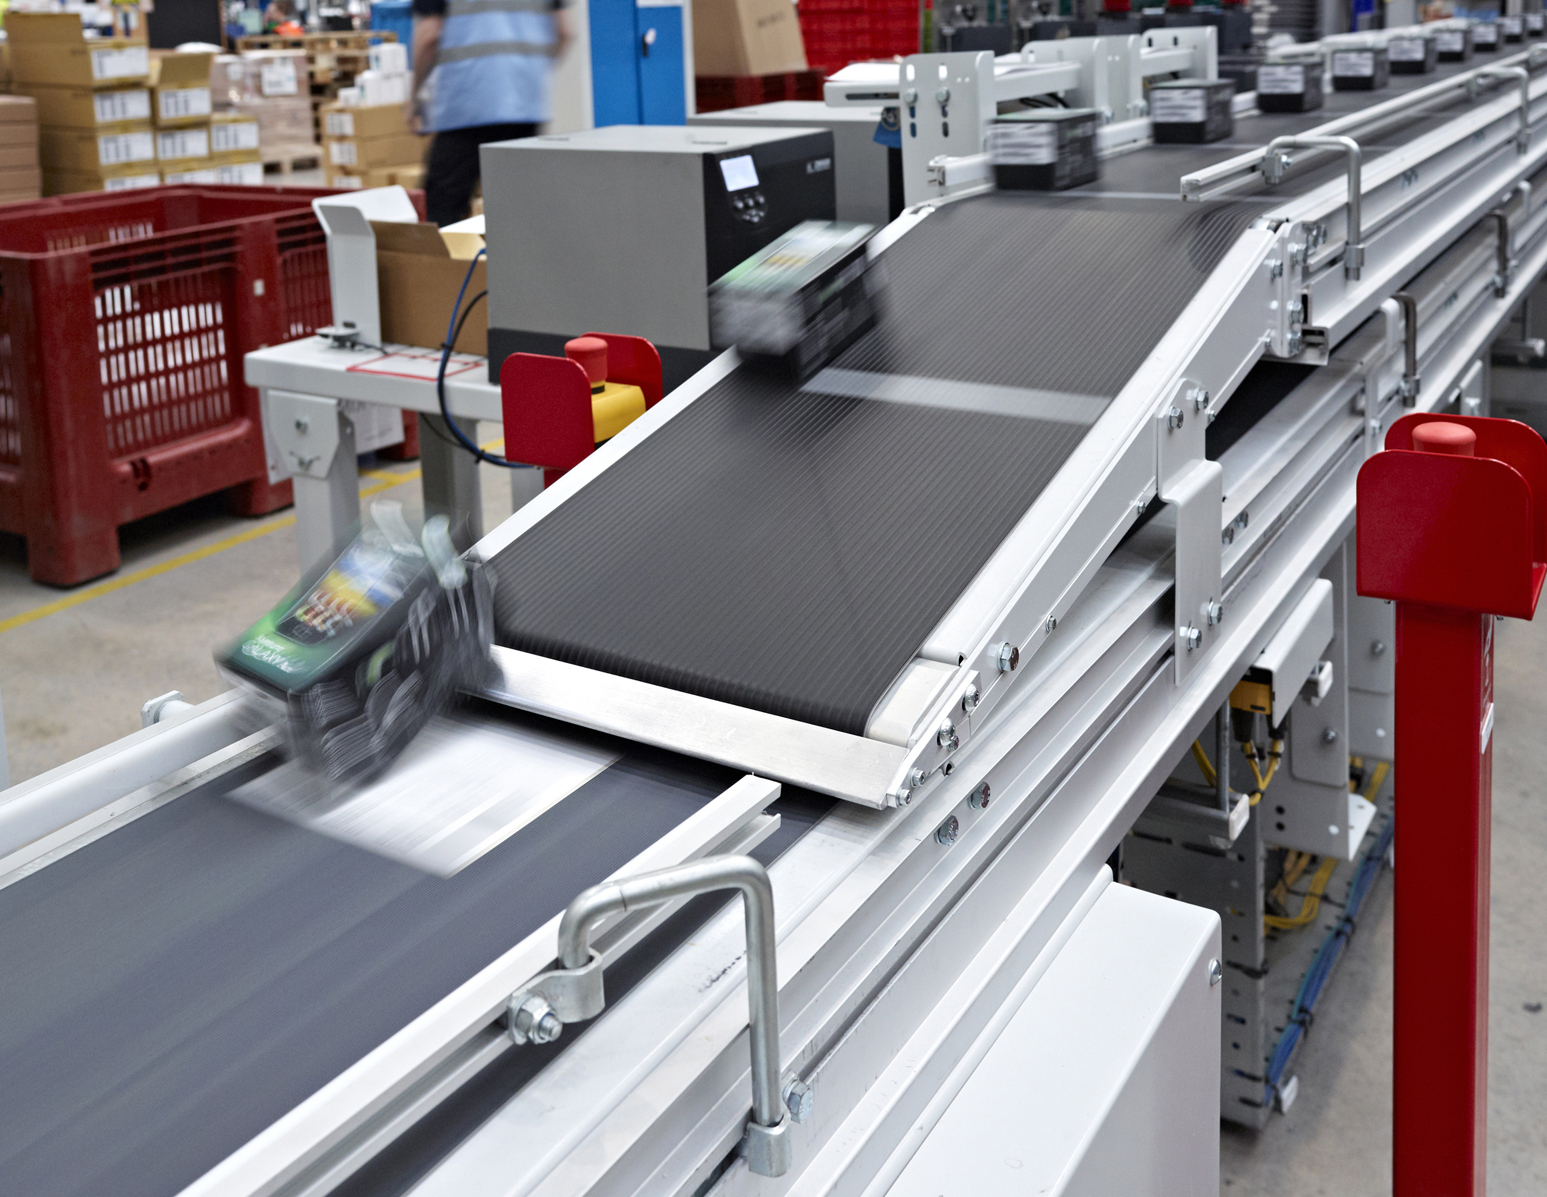 Marrying of printed advice notes with scanned items. Synchronised servo driven conveyors ensure high-accuracy order traceability.